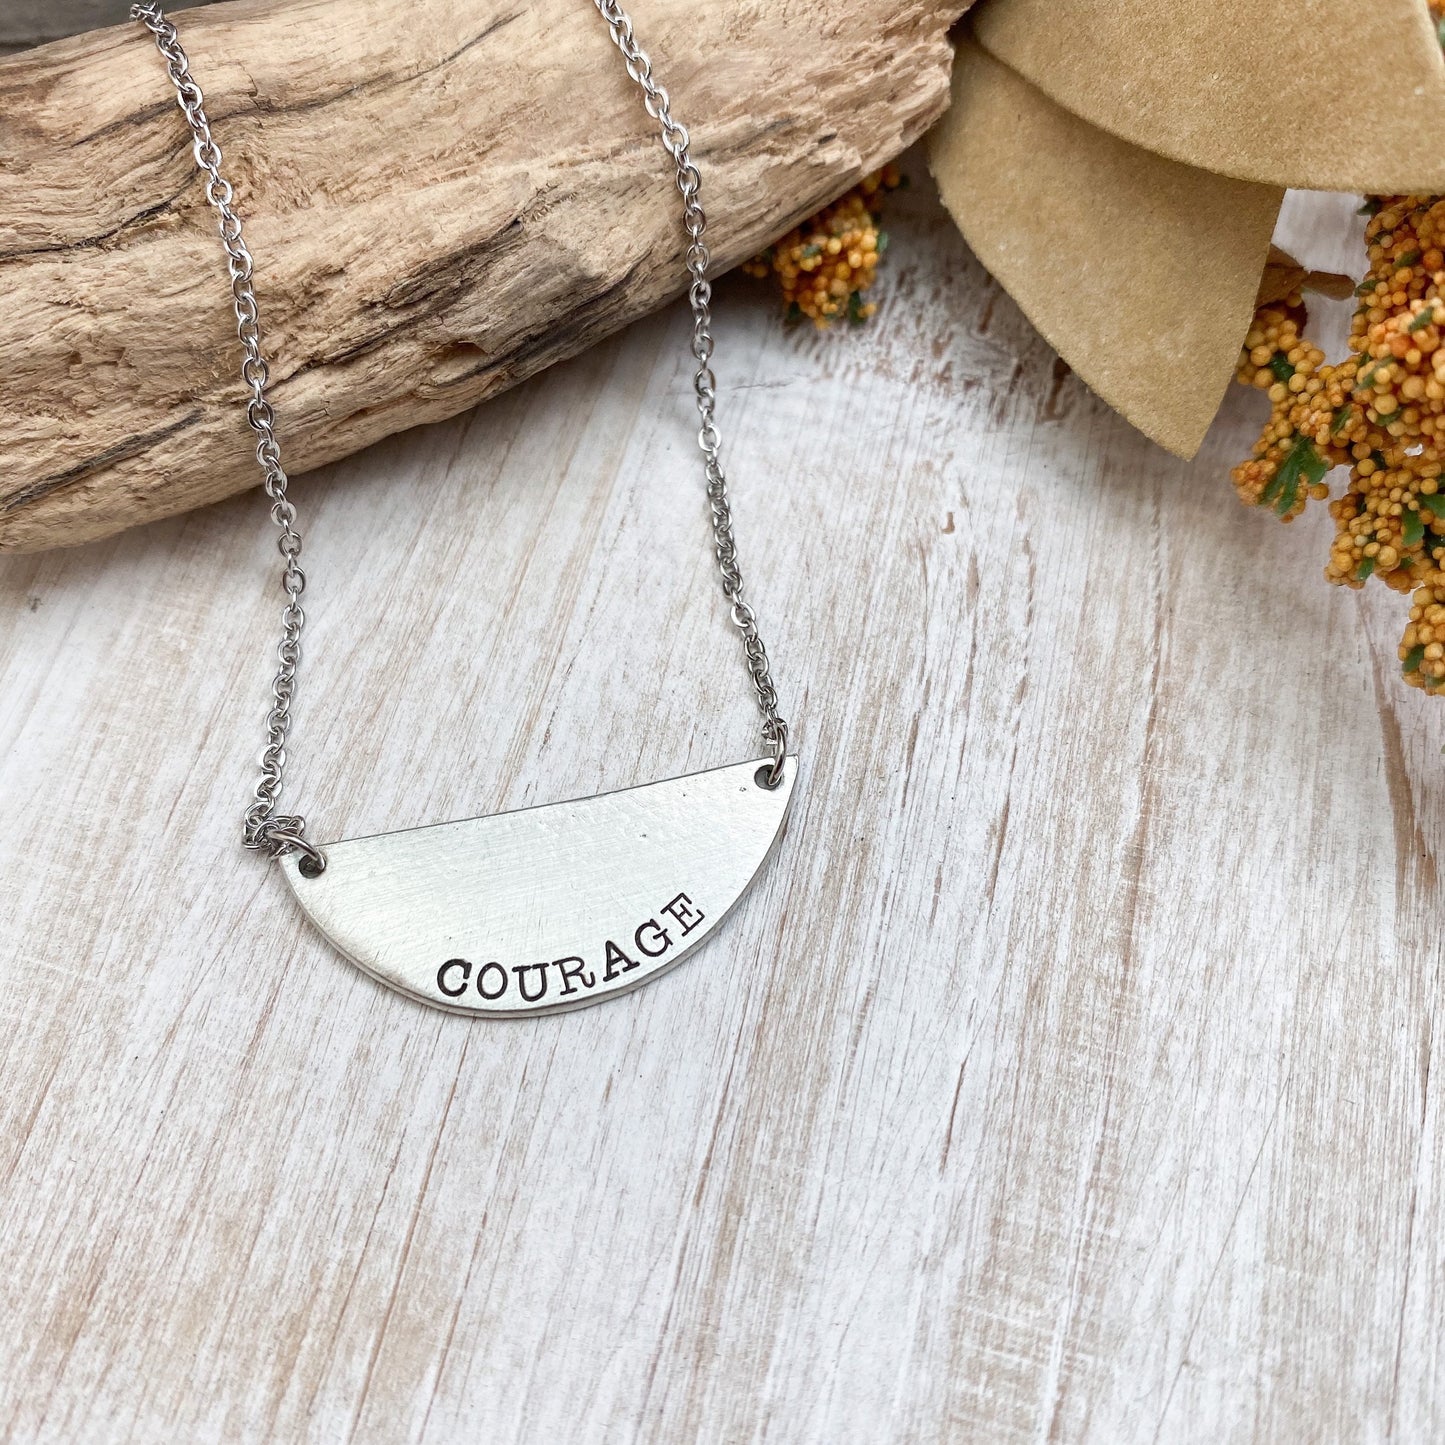 Courage necklace--have courage--word necklace--courage dear heart--simple bar necklace--minimalist word jewelry--Christian faith friend gift